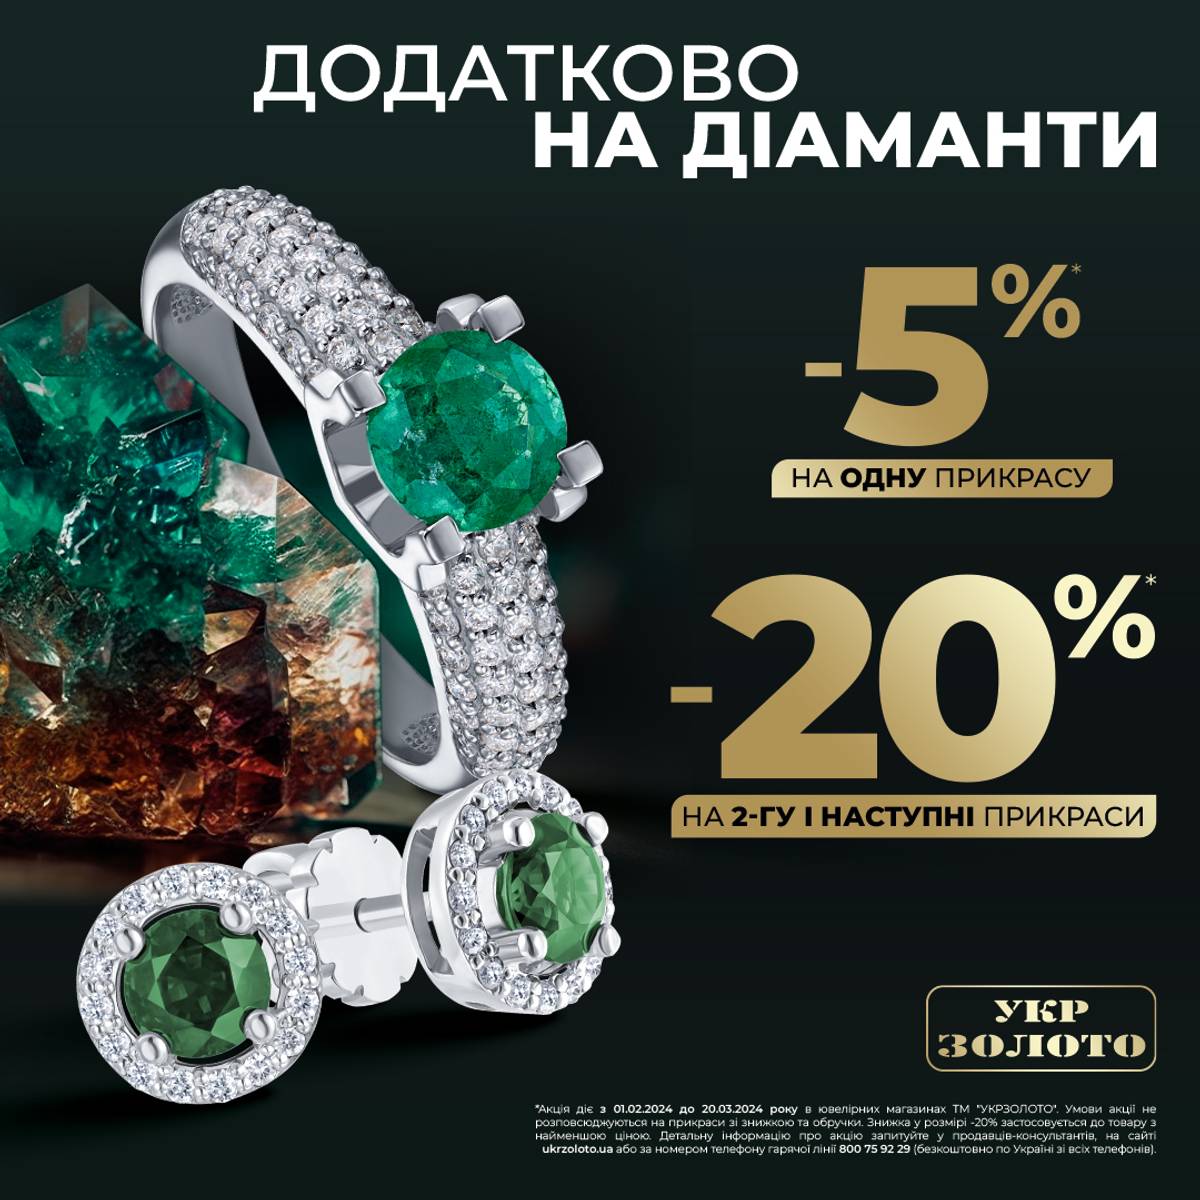 Give special gifts together with "Ukrzoloto"